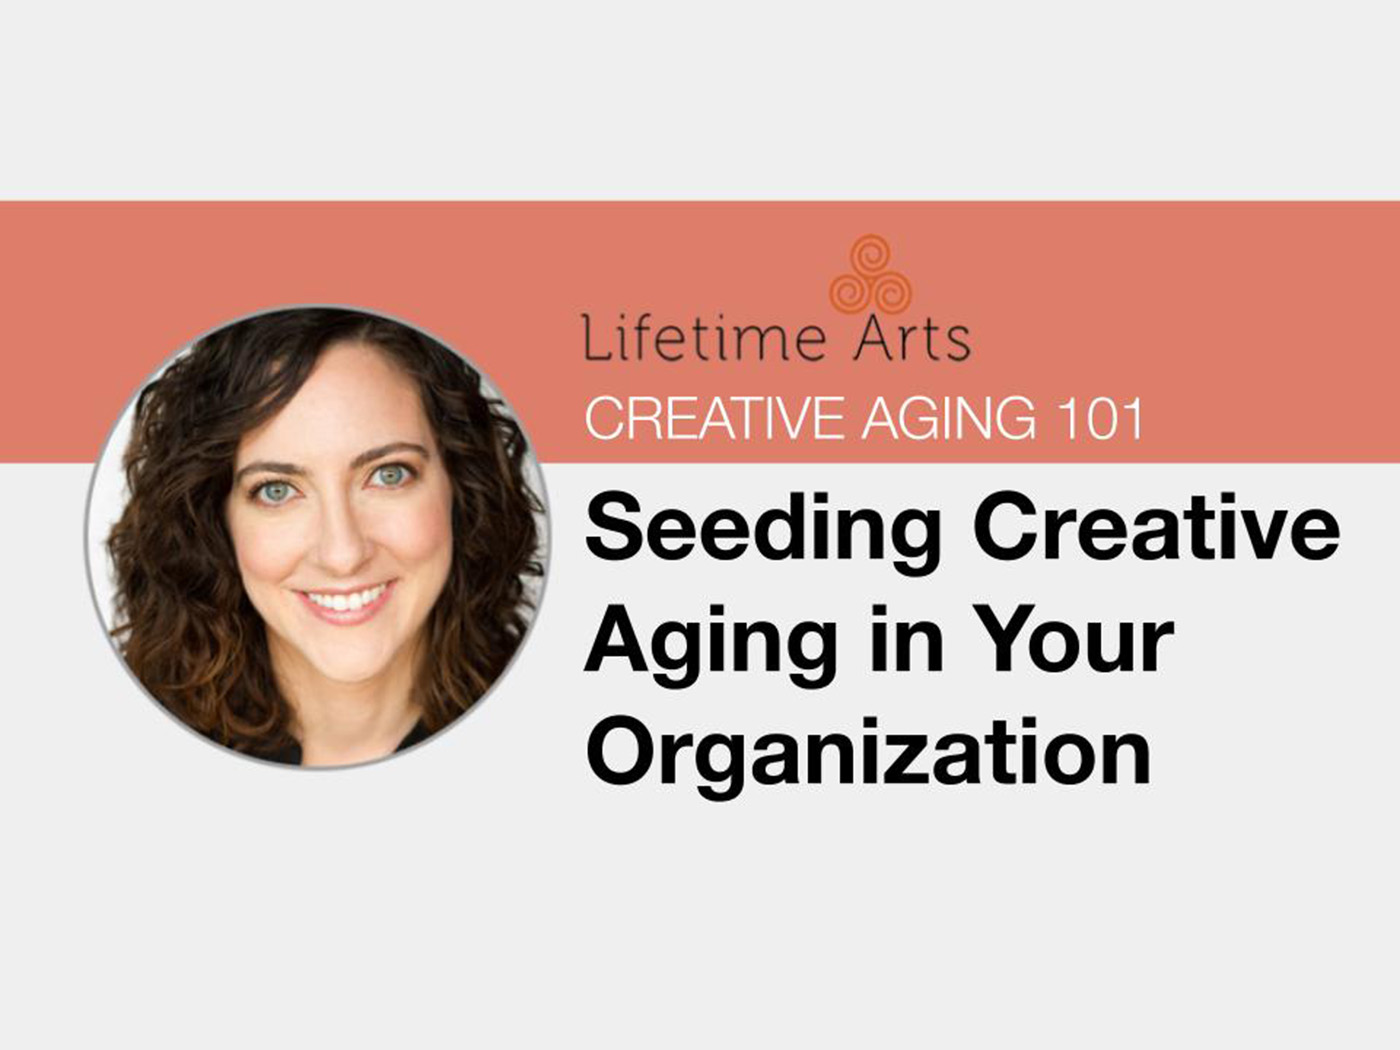 Creative Aging 101 Seeding Creative Aging in Your Organization The